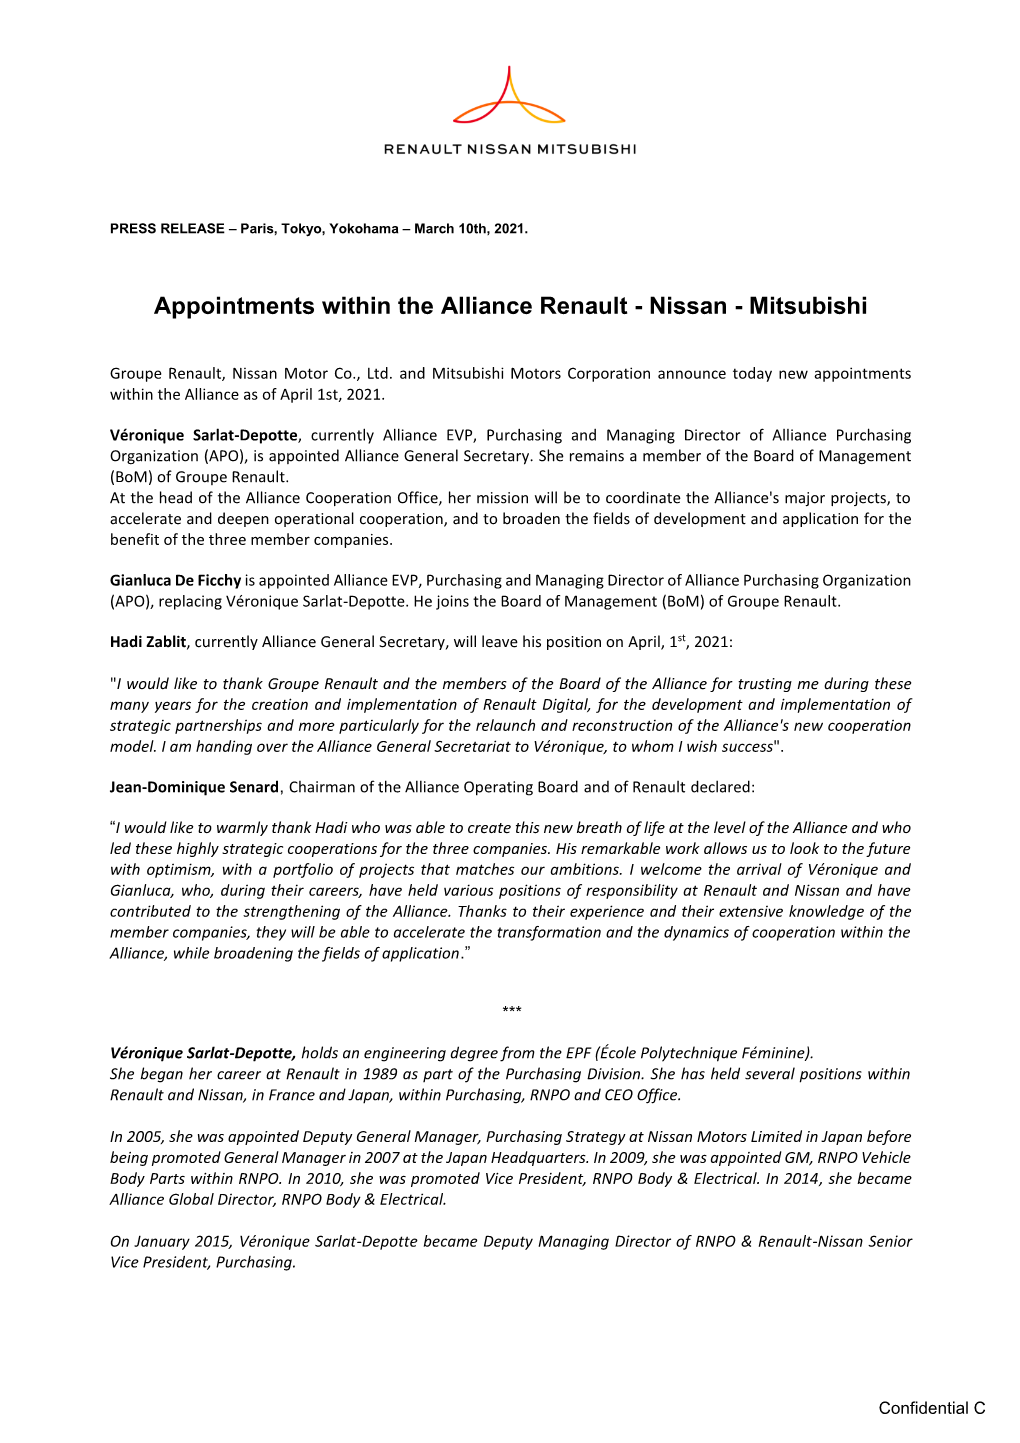 Appointments Within the Alliance Renault - Nissan - Mitsubishi